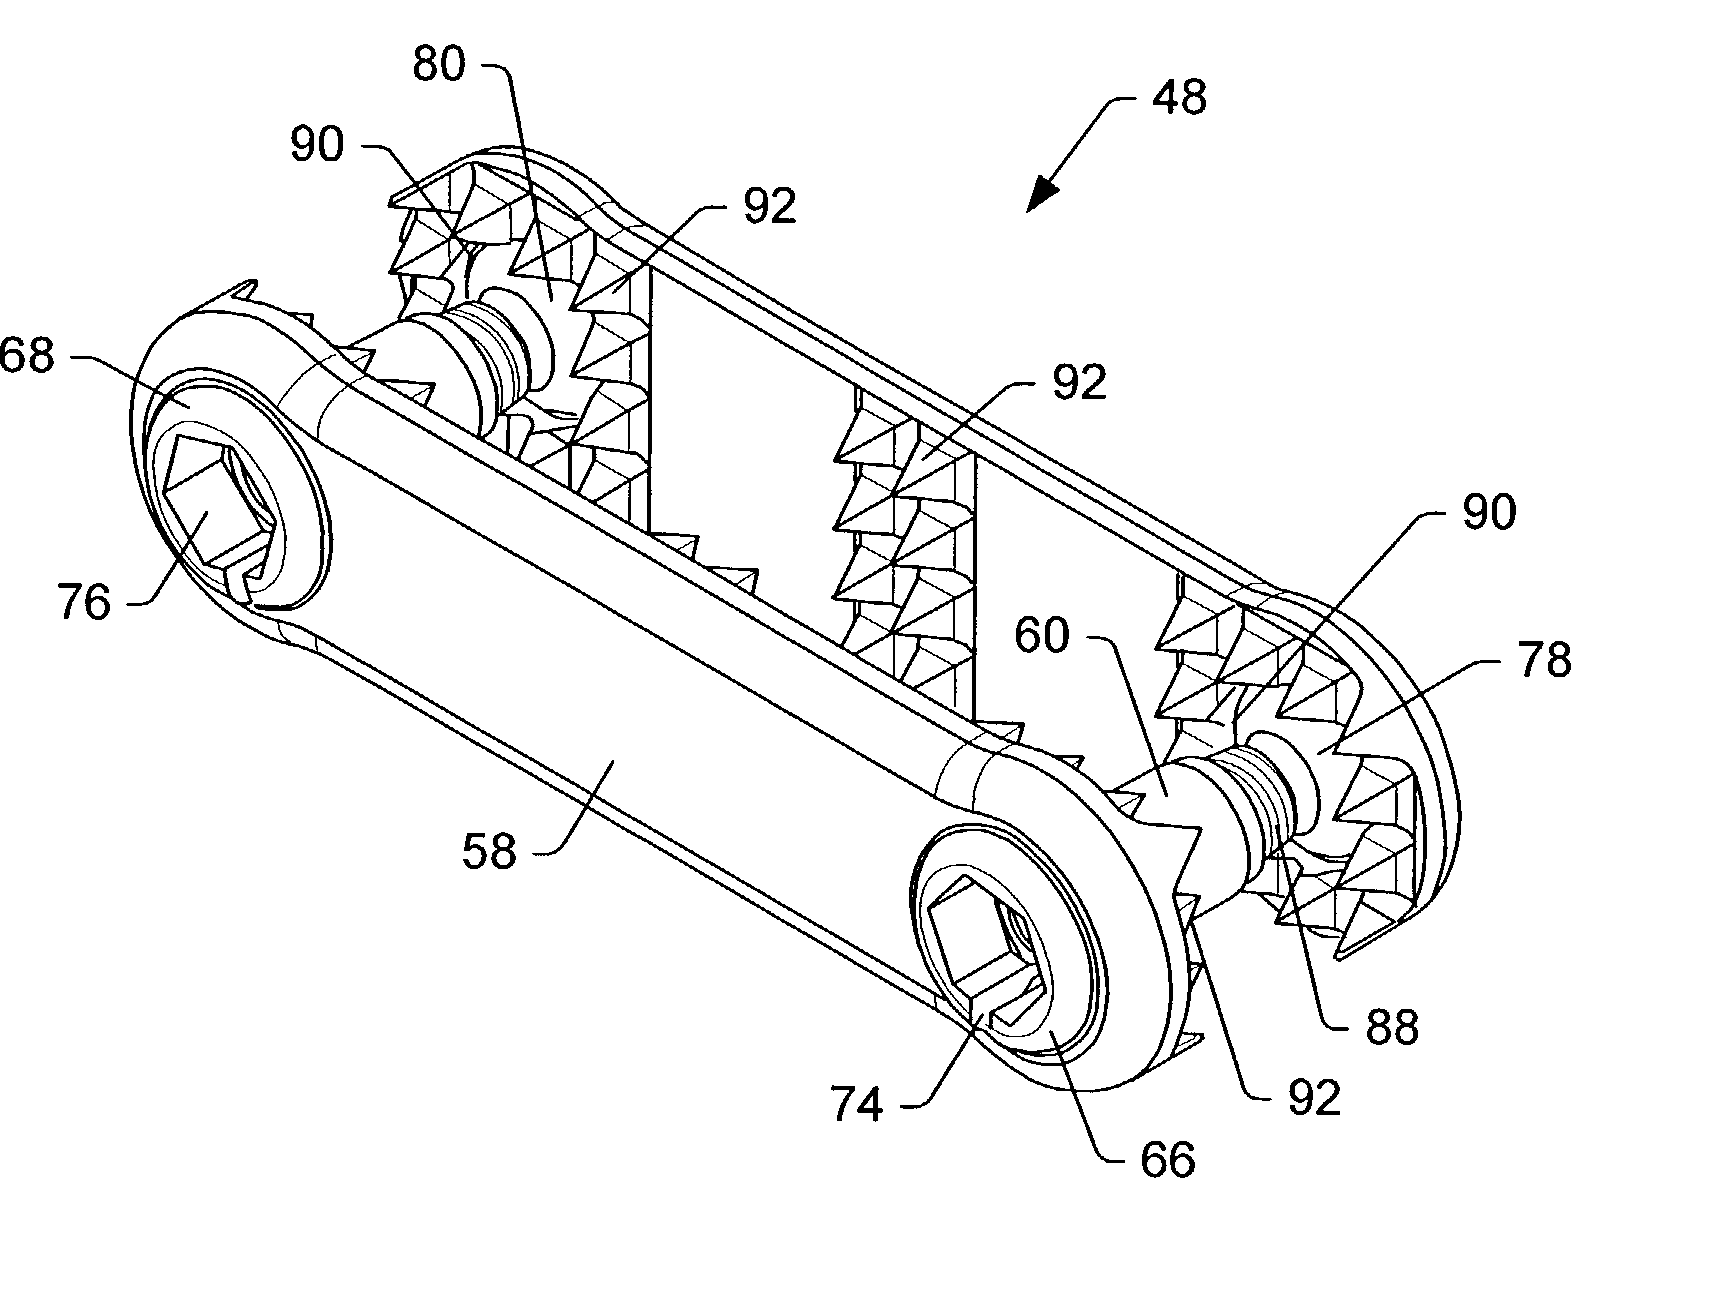 Spinal stabilization system and method